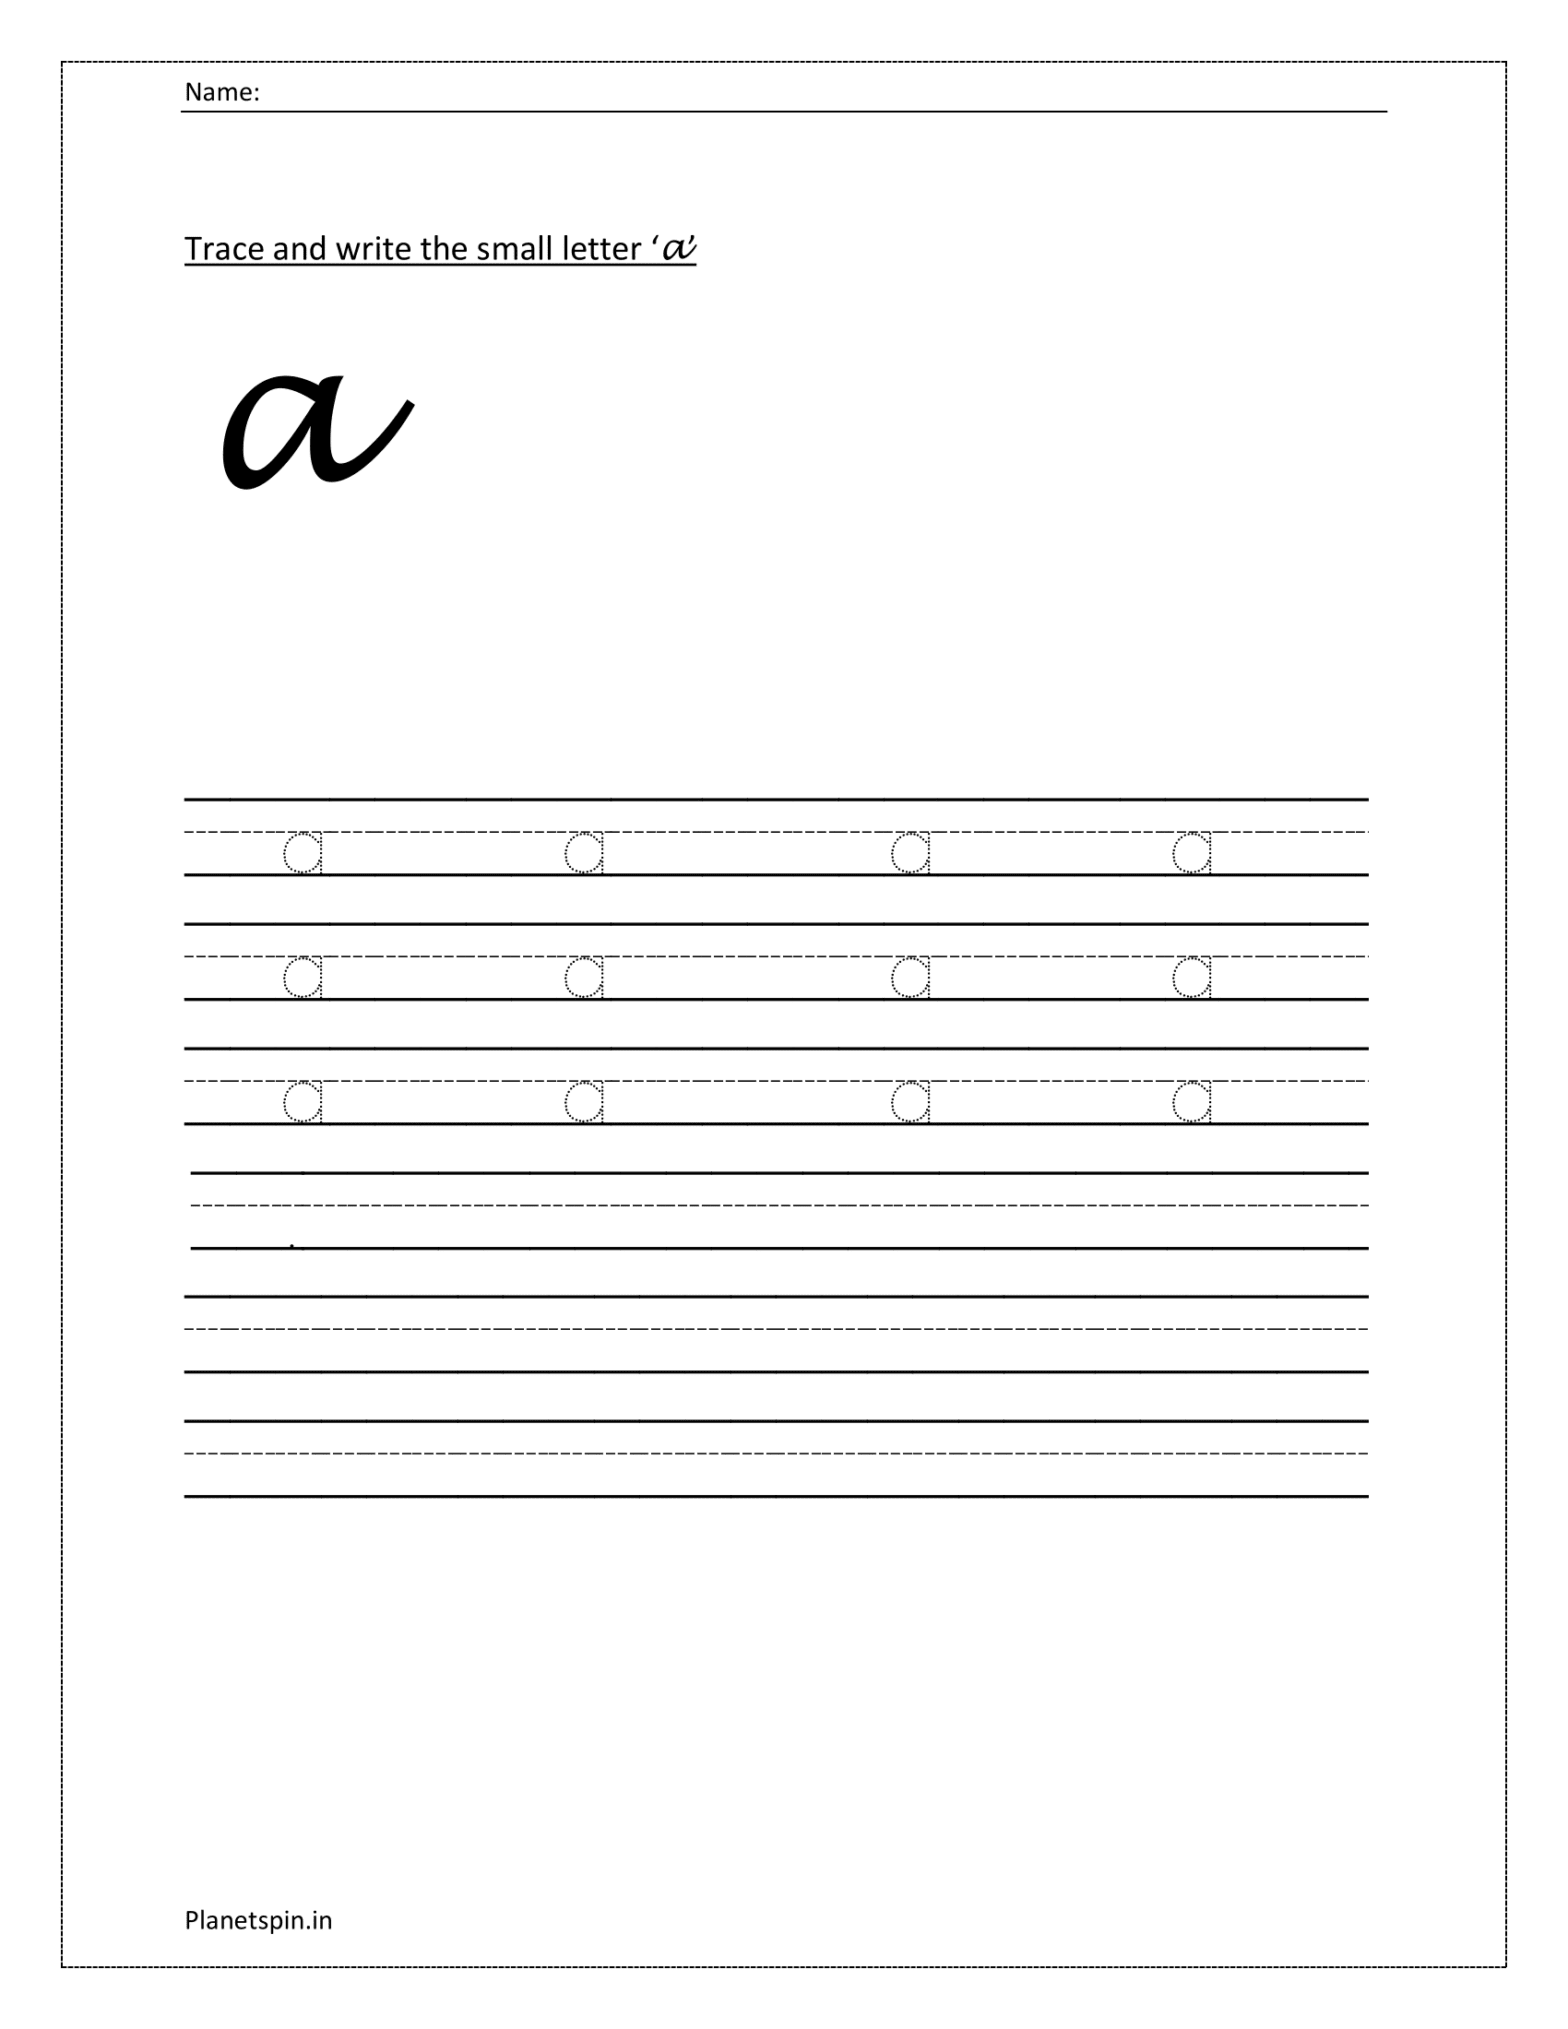 Letter a worksheet for preschool | Planetspin.in